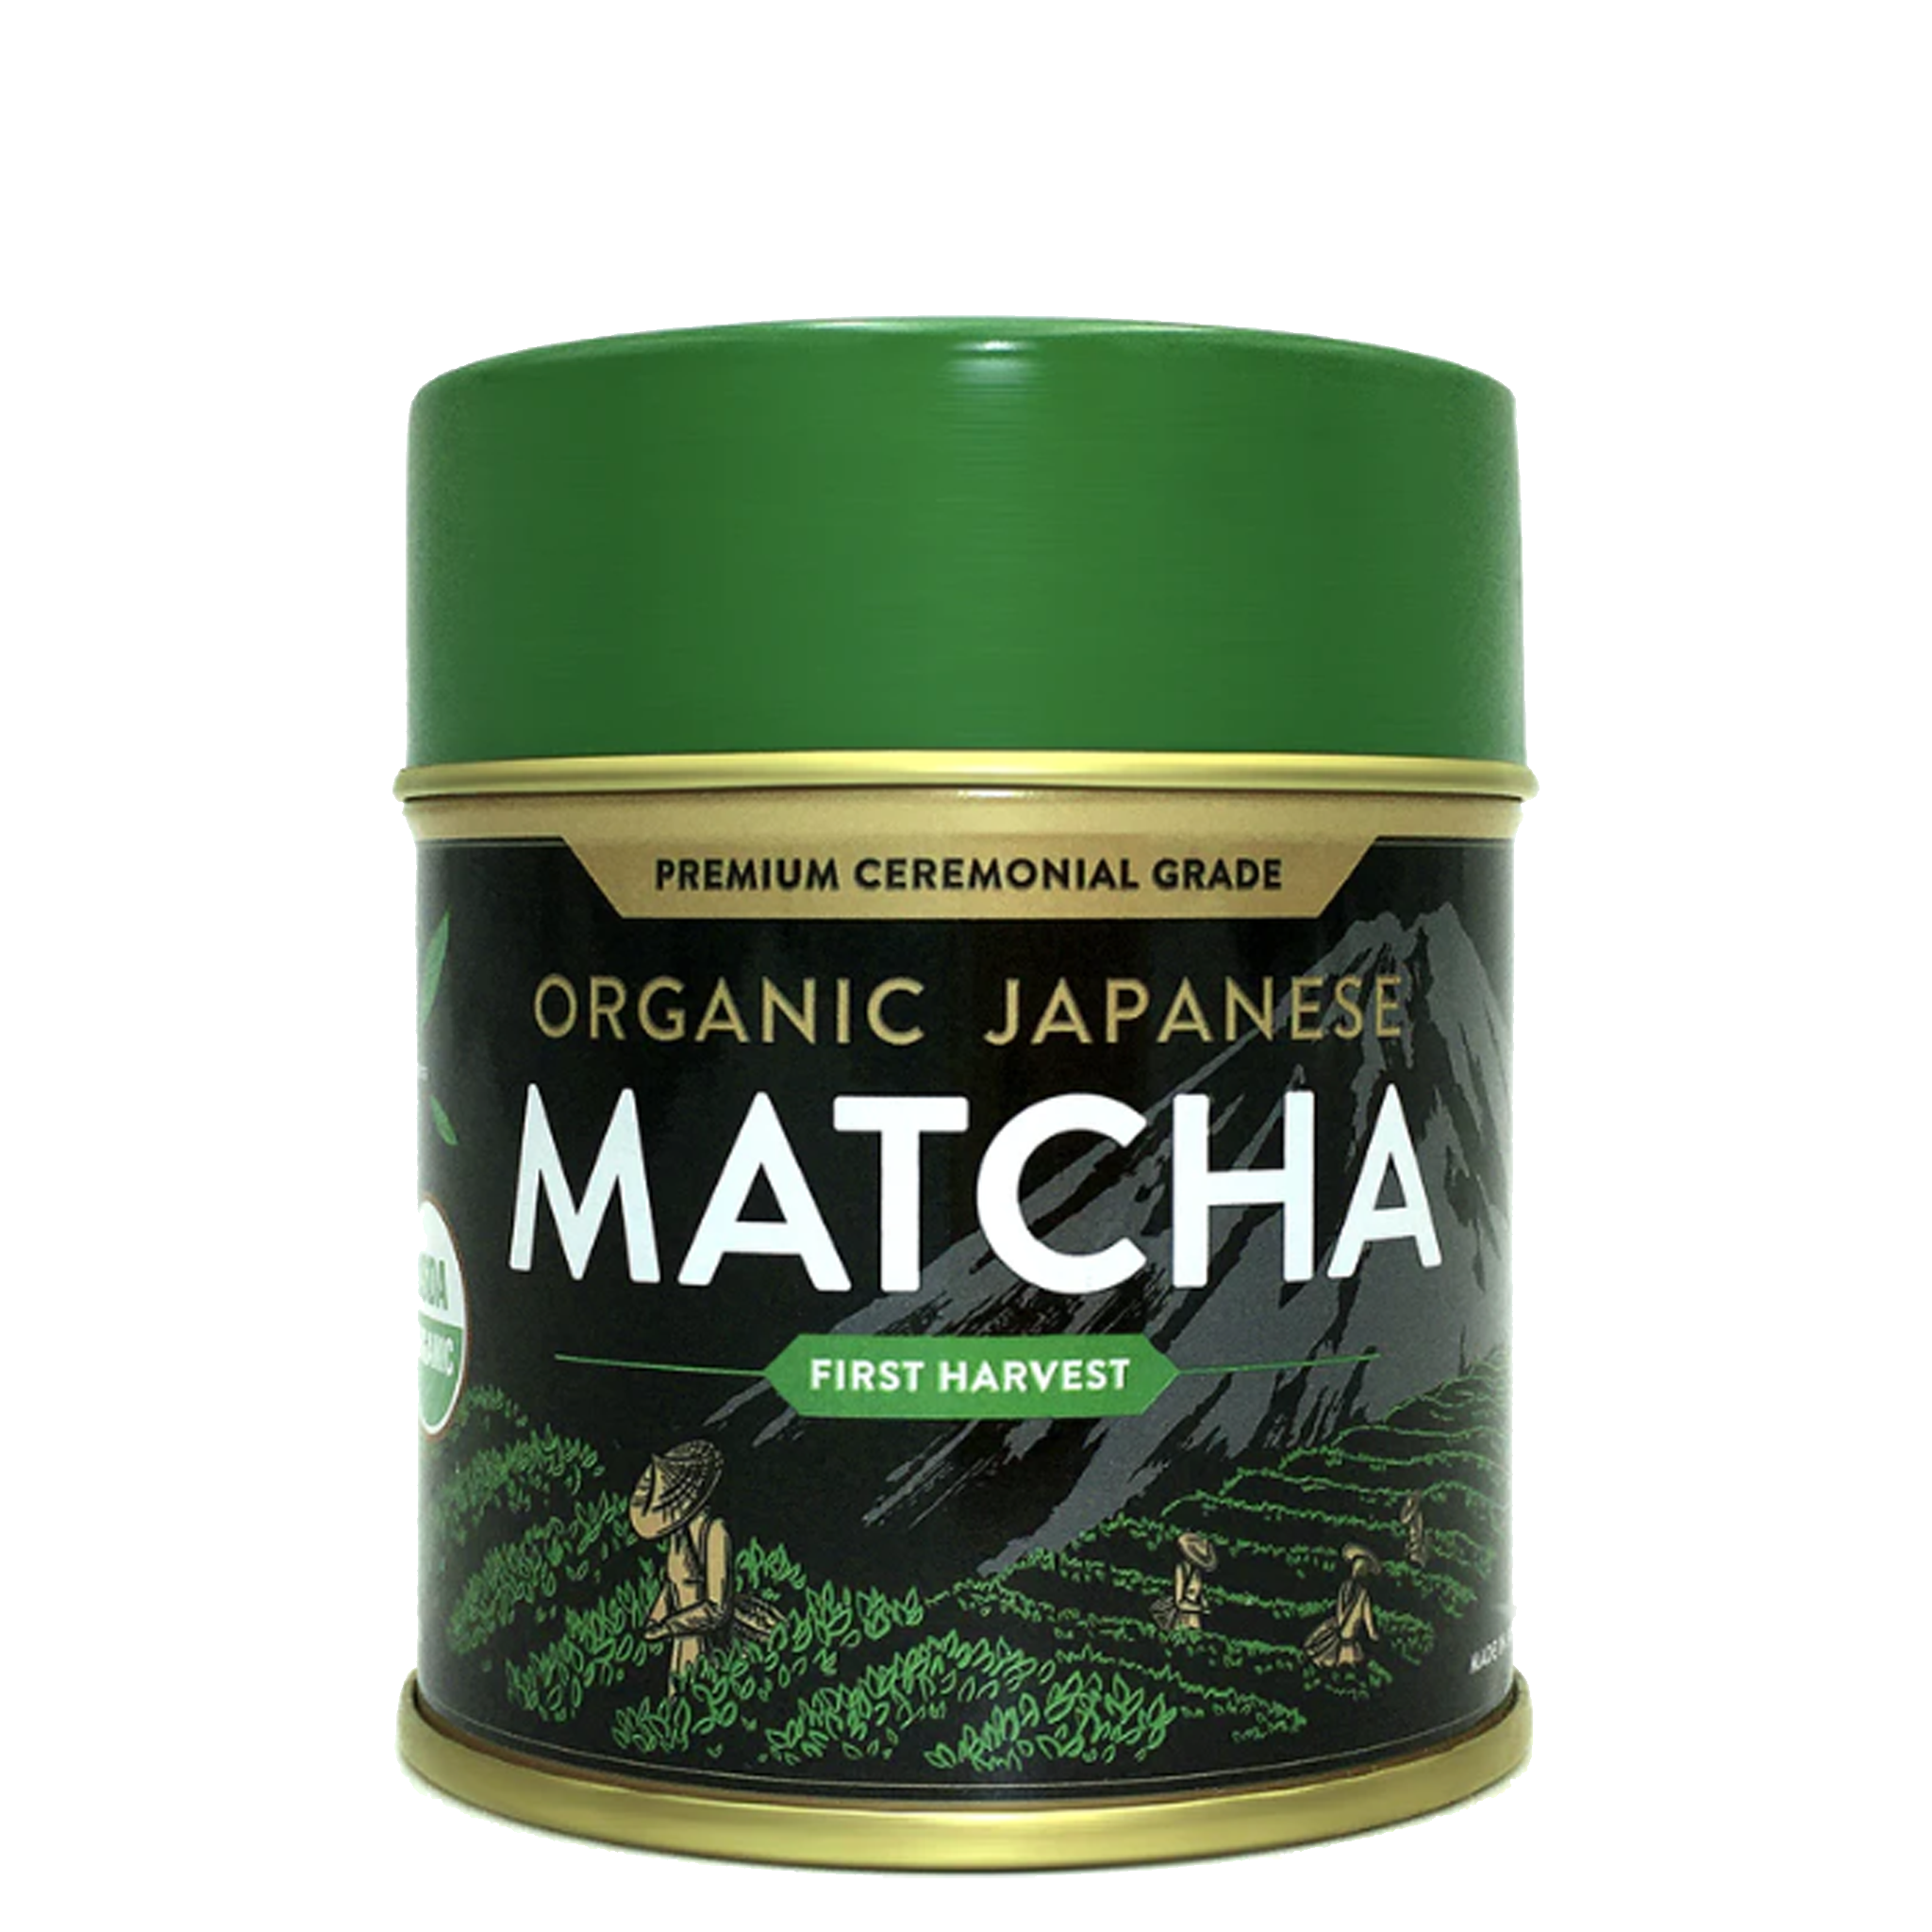 GMA Ceremonial Grade Matcha Green Tea Powder 4.92 oz ceremonial matcha  powder, Non GMO, Vegan Friendly, Gluten Free For direct brewing and drinking